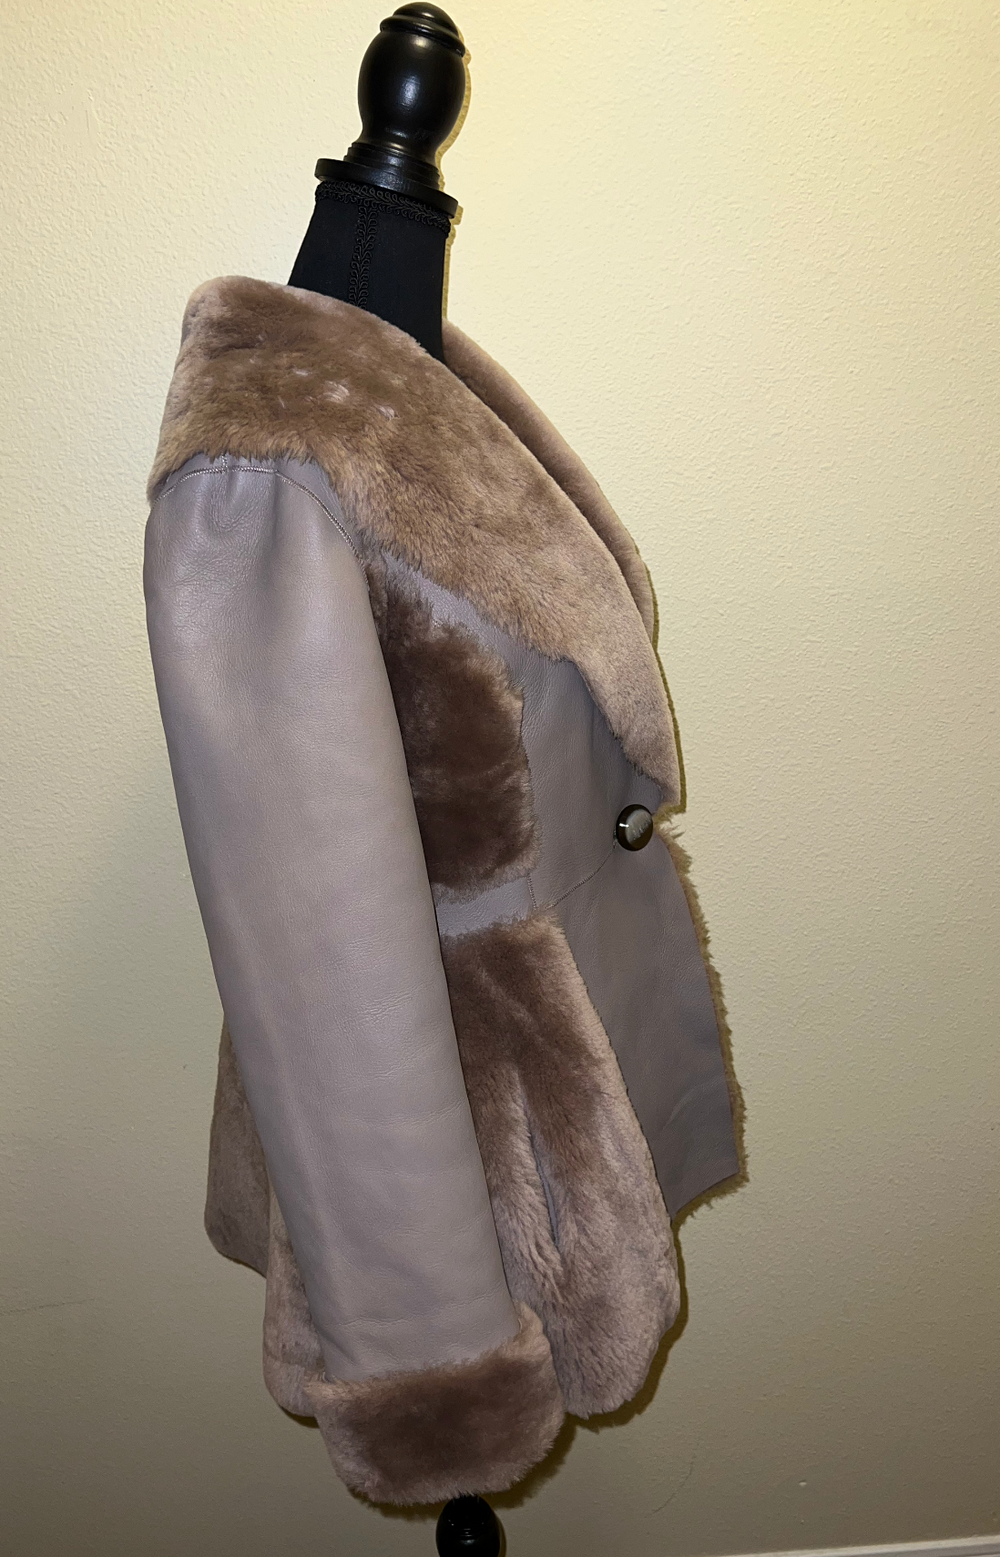 Size S: Shearling